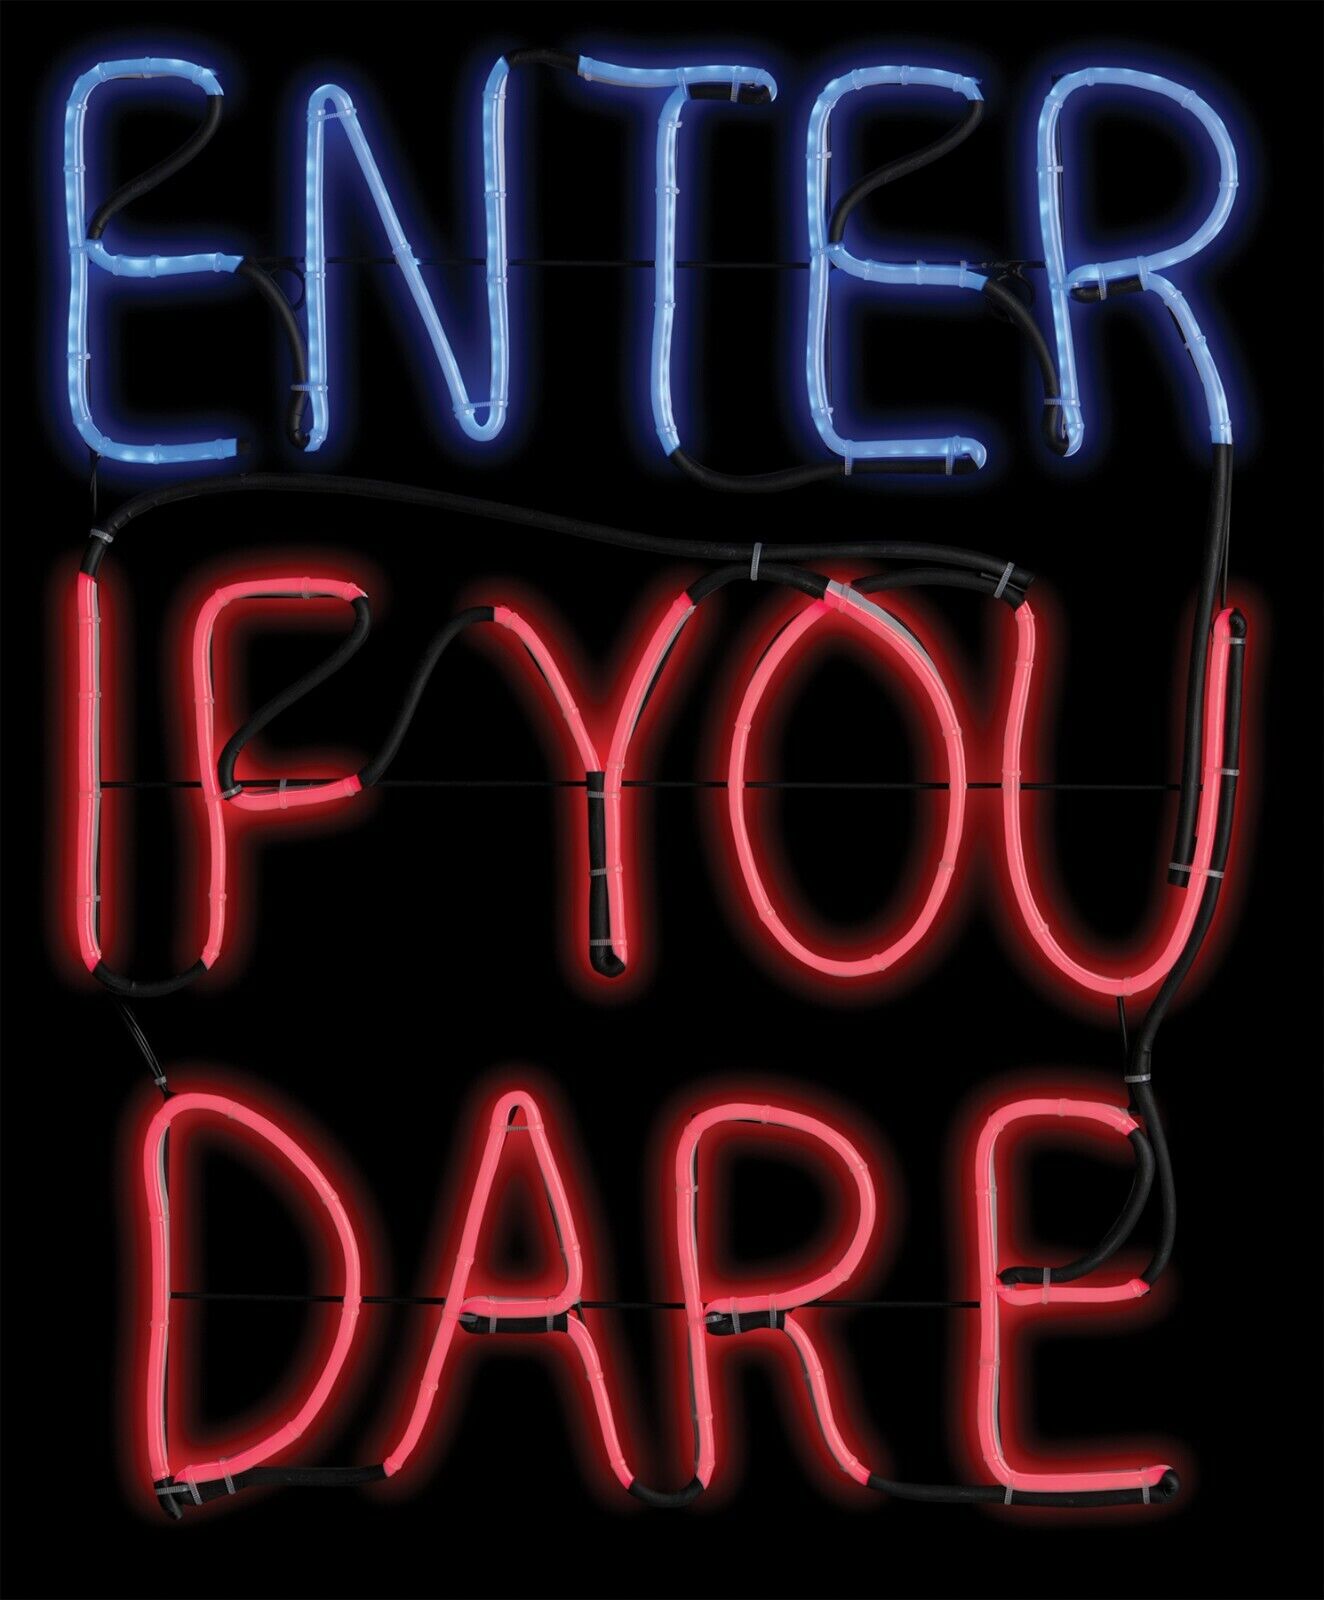 Retro LED Light -ENTER IF YOU DARE- Halloween Haunted House Sign Prop Decoration